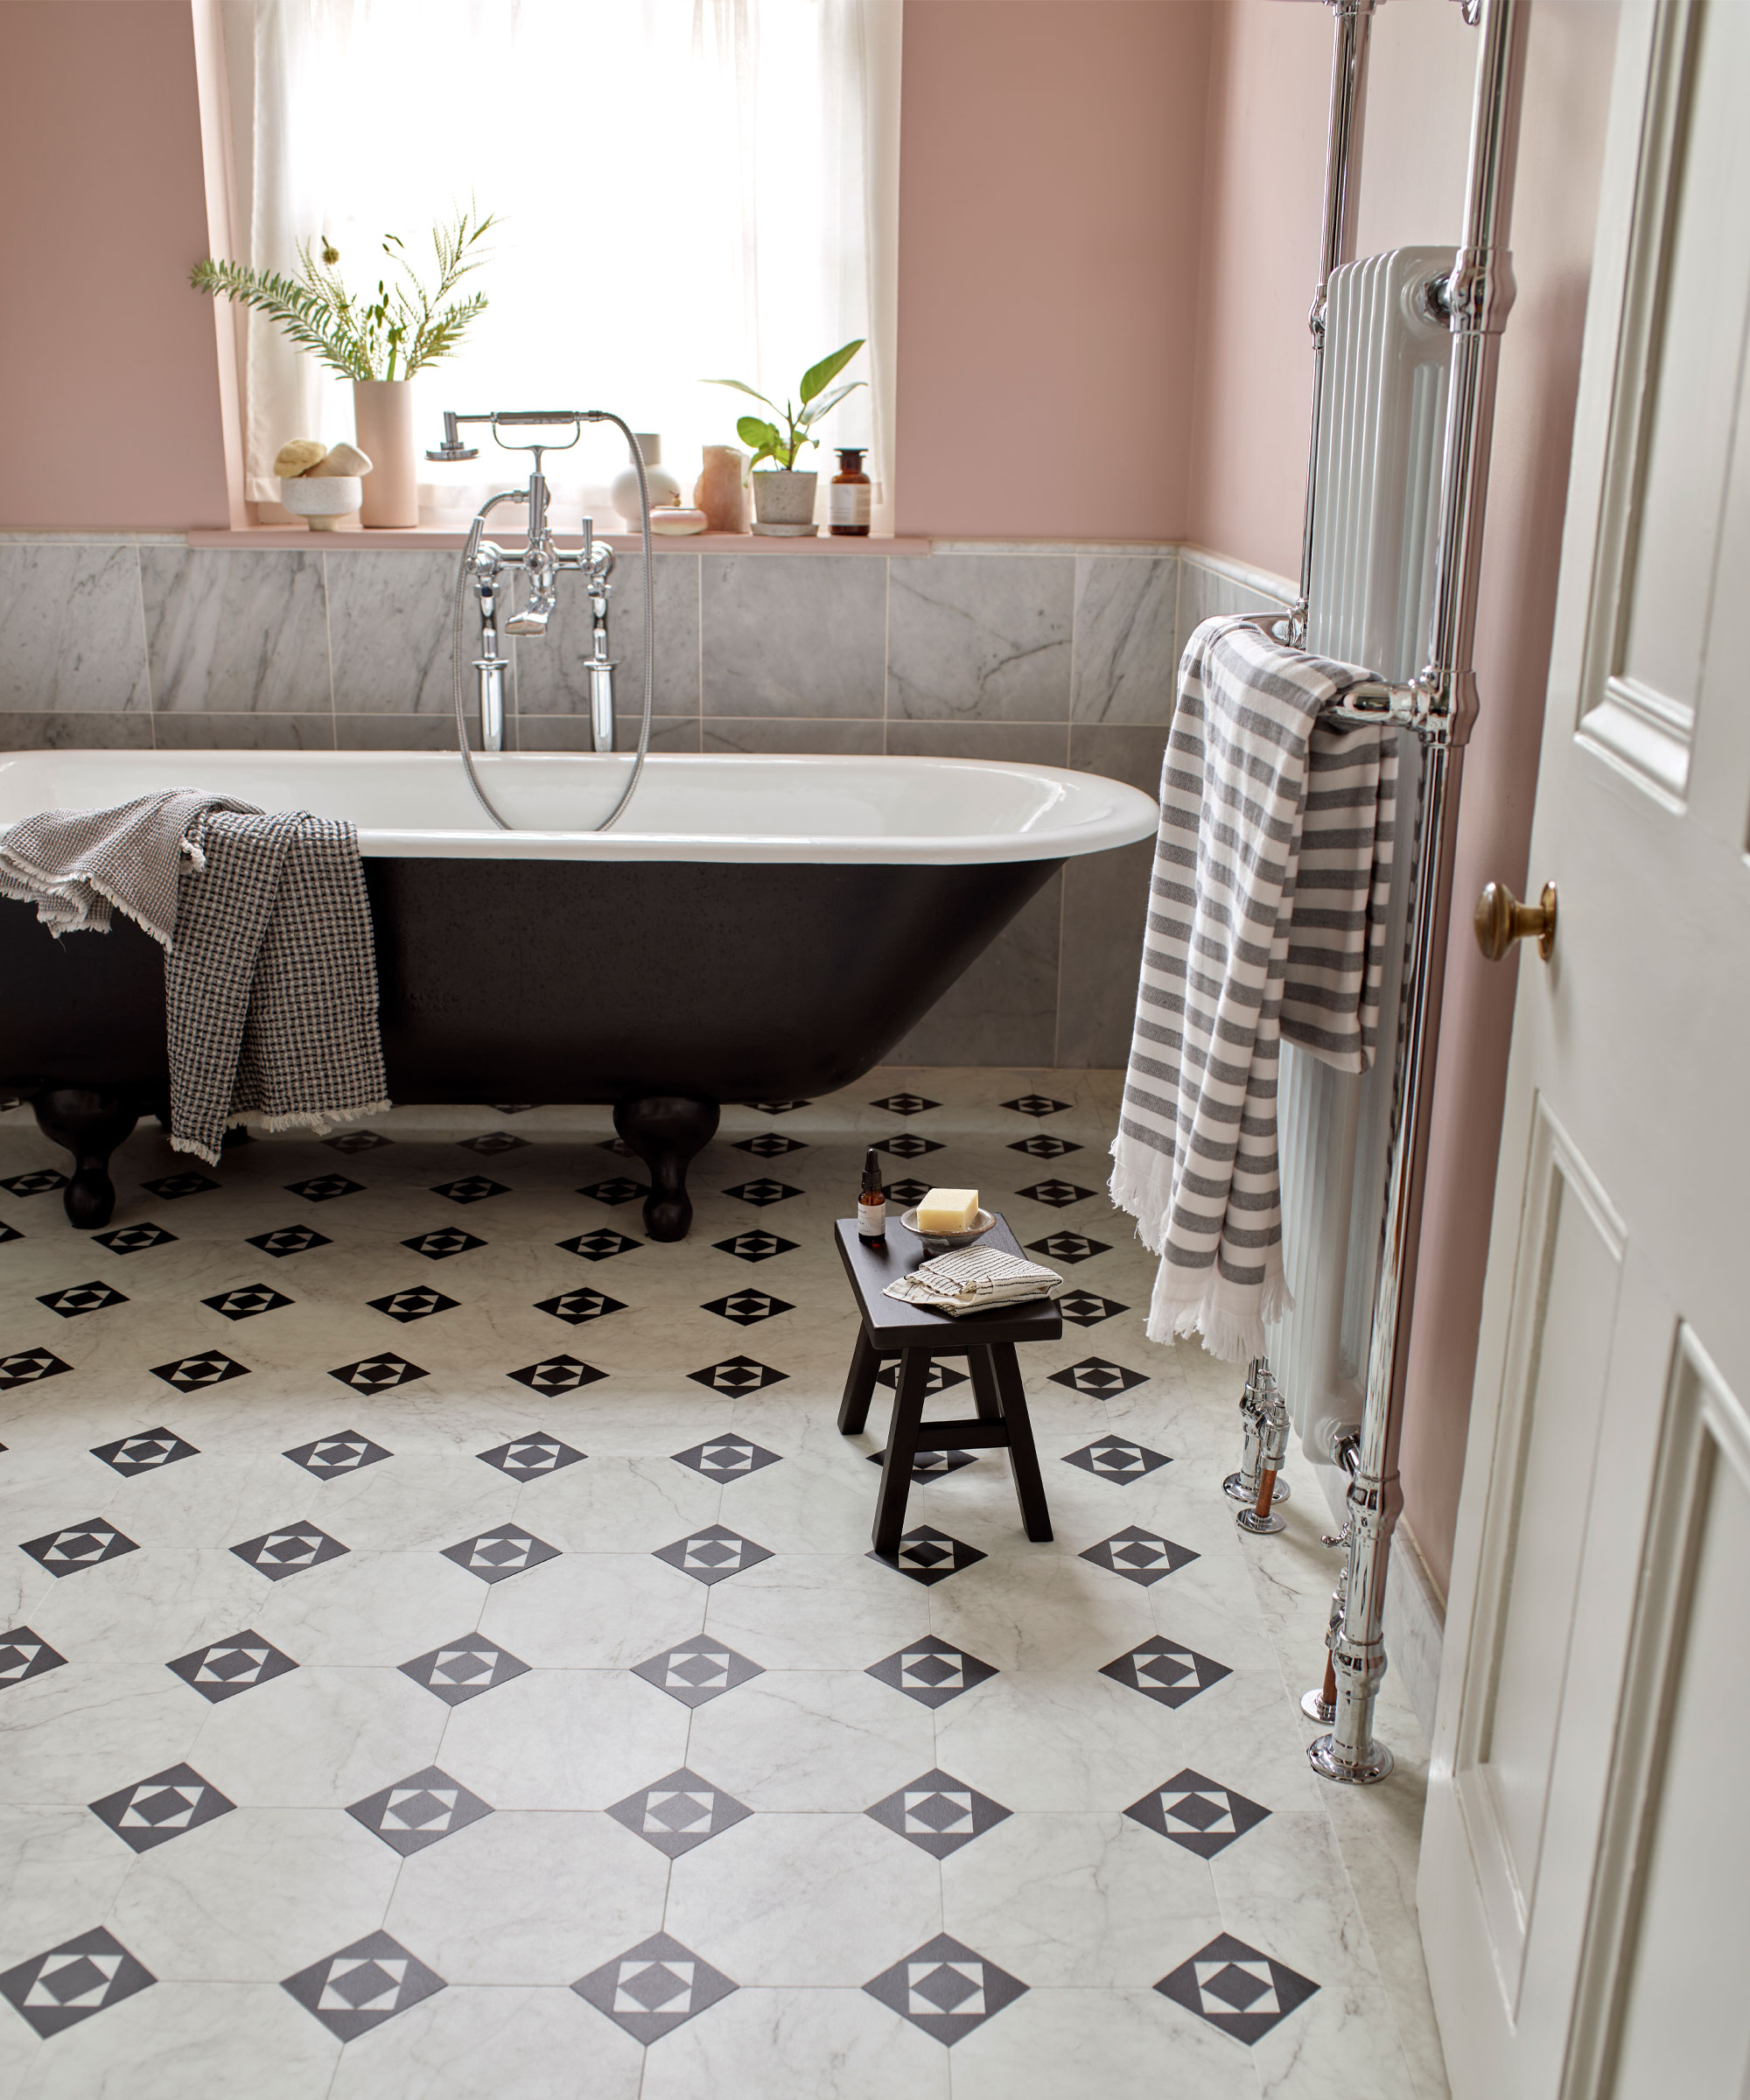 Bathroom with laminate tiles in traditional Victorian pattern in marble and black, marble wall tiles mounted halfway on wall, rest of wall painted a light pink, black bathtub, wooden stool, towel rail, window shelf with decorative vases, plants and toiletries